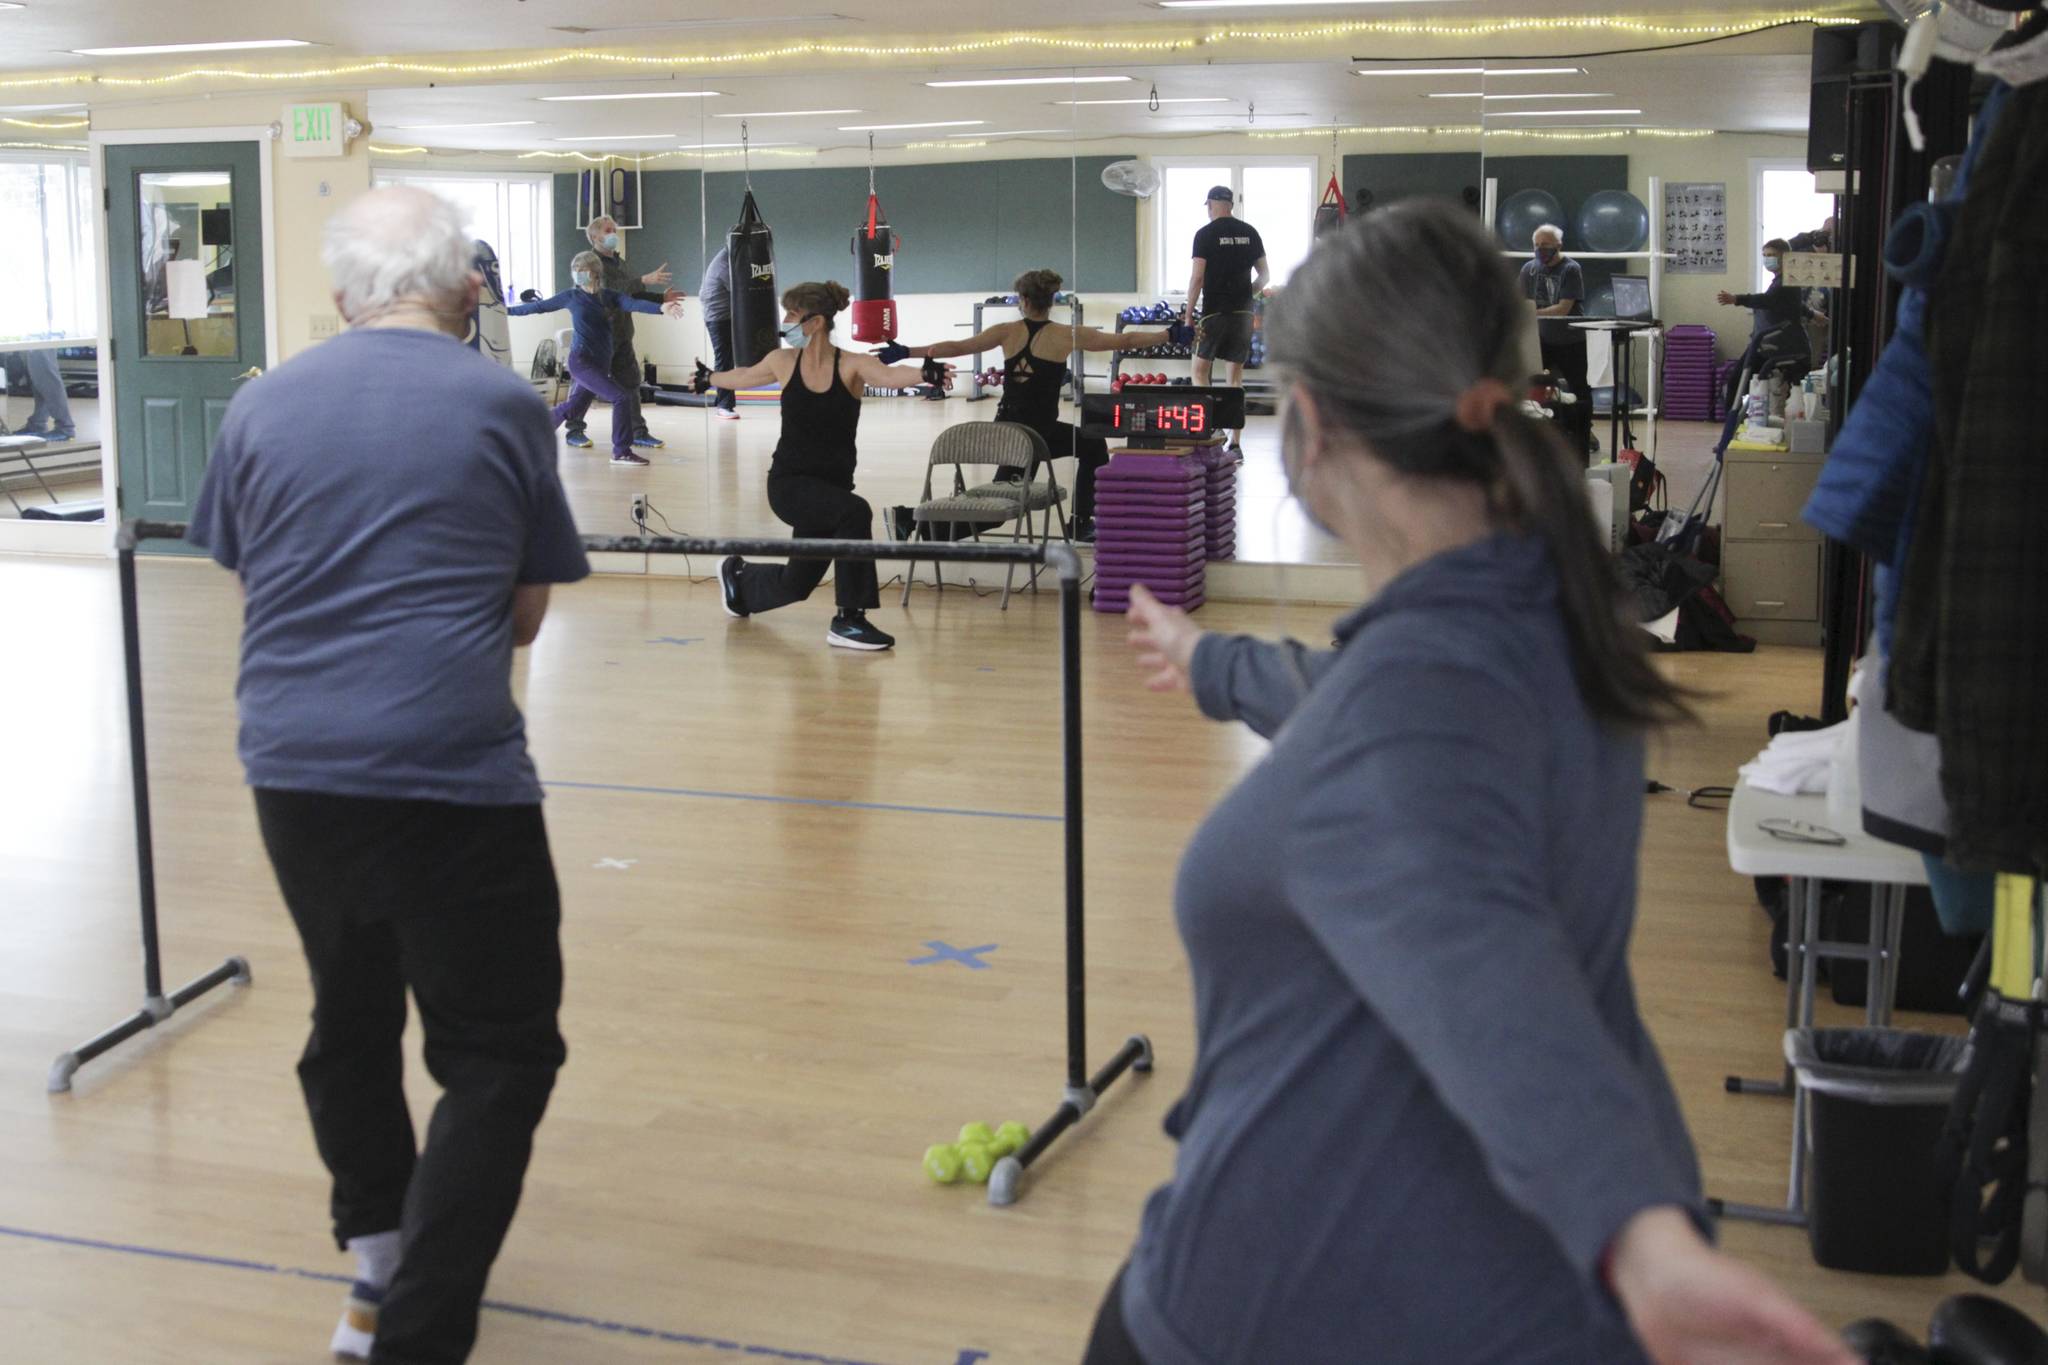 Janet Valentour, center, leads a boxing class designed to help fight back against the symptoms Parkinson’s disease through a specific regimen at Pavitt Health and Fitness on March. 2, 2021. (Michael S. Lockett / Juneau Empire)